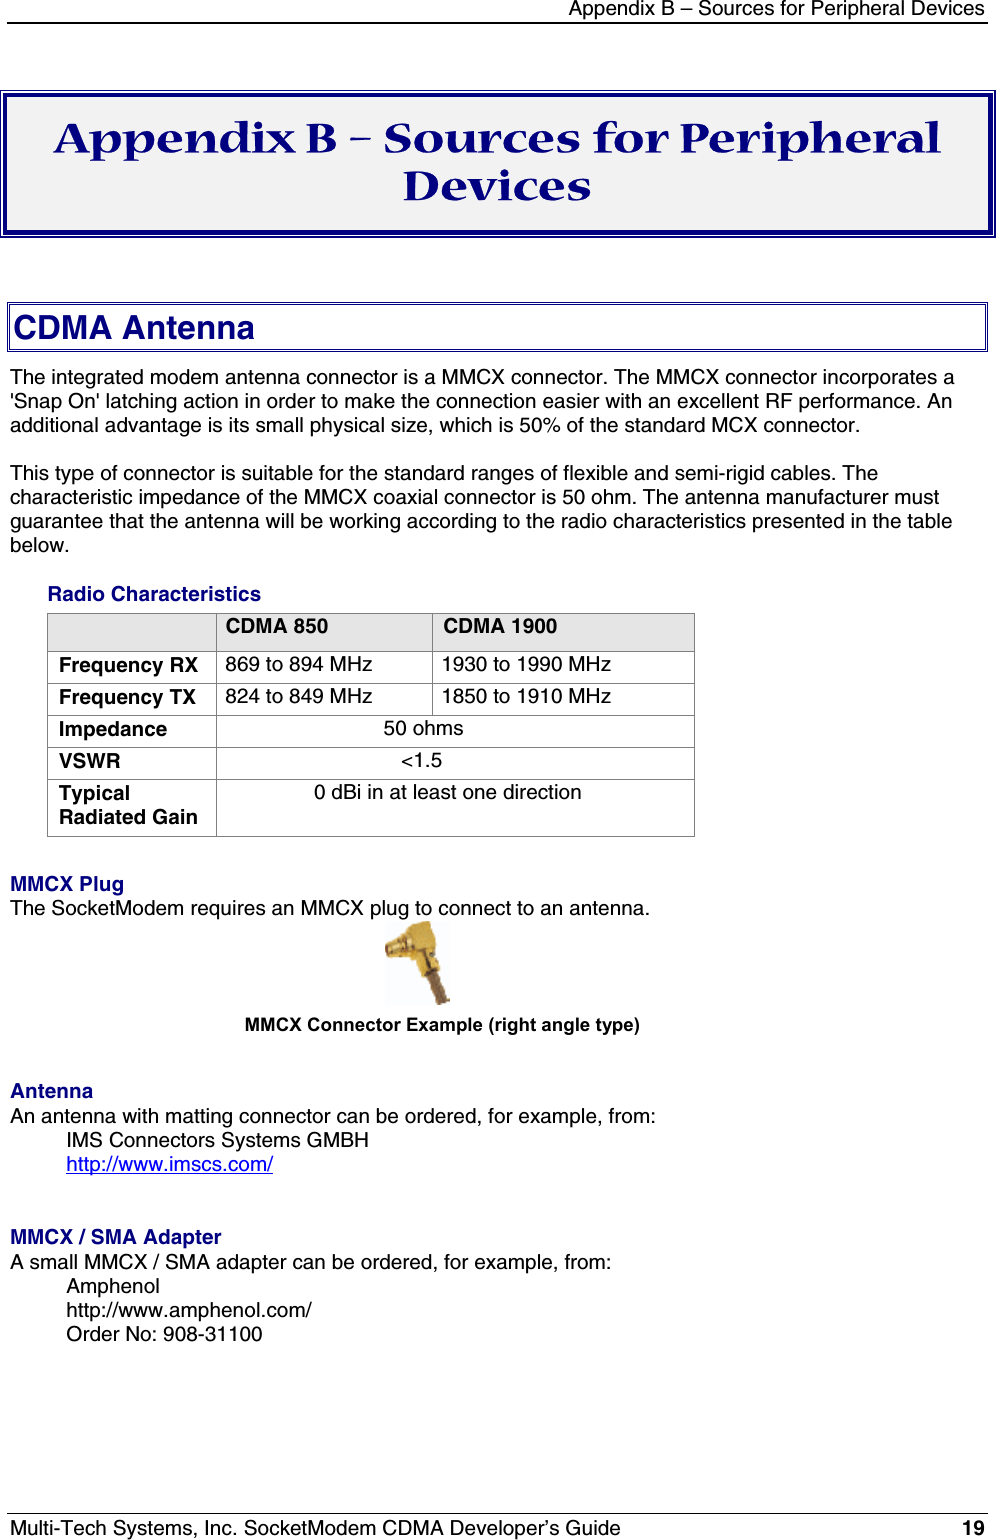 Appendix B – Sources for Peripheral DevicesMulti-Tech Systems, Inc. SocketModem CDMA Developer’s Guide 19Appendix B – Sources for PeripheralDevicesCDMA AntennaThe integrated modem antenna connector is a MMCX connector. The MMCX connector incorporates a&apos;Snap On&apos; latching action in order to make the connection easier with an excellent RF performance. Anadditional advantage is its small physical size, which is 50% of the standard MCX connector.This type of connector is suitable for the standard ranges of flexible and semi-rigid cables. Thecharacteristic impedance of the MMCX coaxial connector is 50 ohm. The antenna manufacturer mustguarantee that the antenna will be working according to the radio characteristics presented in the tablebelow.Radio CharacteristicsCDMA 850 CDMA 1900Frequency RX 869 to 894 MHz 1930 to 1990 MHzFrequency TX 824 to 849 MHz 1850 to 1910 MHzImpedance                            50 ohmsVSWR                               &lt;1.5TypicalRadiated Gain               0 dBi in at least one directionMMCX PlugThe SocketModem requires an MMCX plug to connect to an antenna.                                             MMCX Connector Example (right angle type)AntennaAn antenna with matting connector can be ordered, for example, from:IMS Connectors Systems GMBHhttp://www.imscs.com/MMCX / SMA AdapterA small MMCX / SMA adapter can be ordered, for example, from:Amphenolhttp://www.amphenol.com/Order No: 908-31100